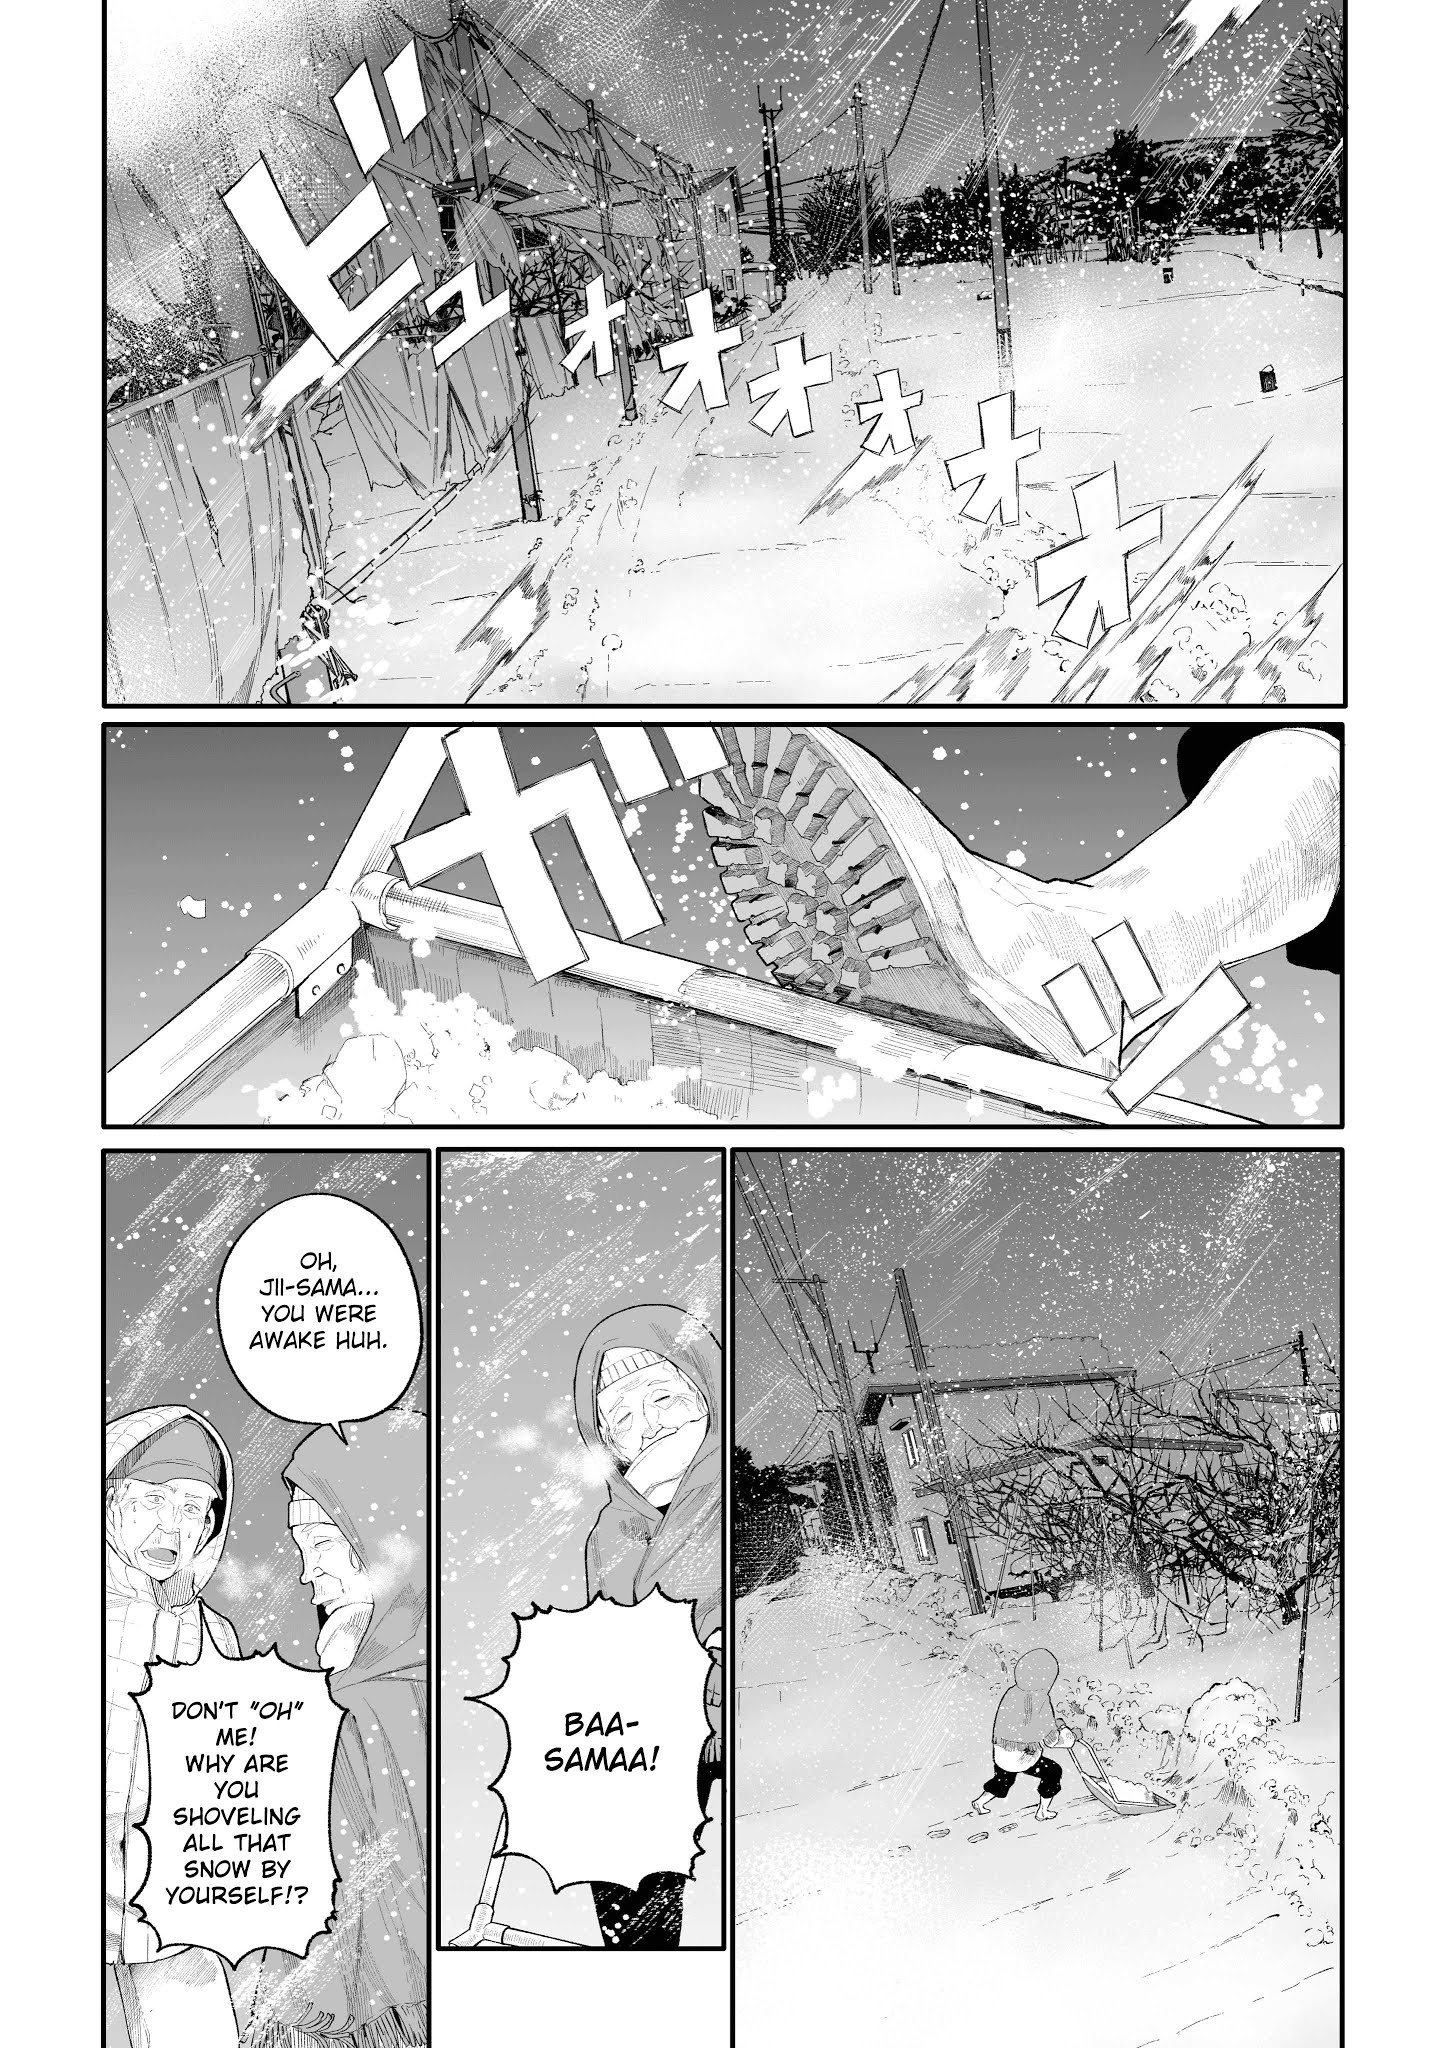 A Story About A Grampa And Granma Returned Back To Their Youth. Chapter 14